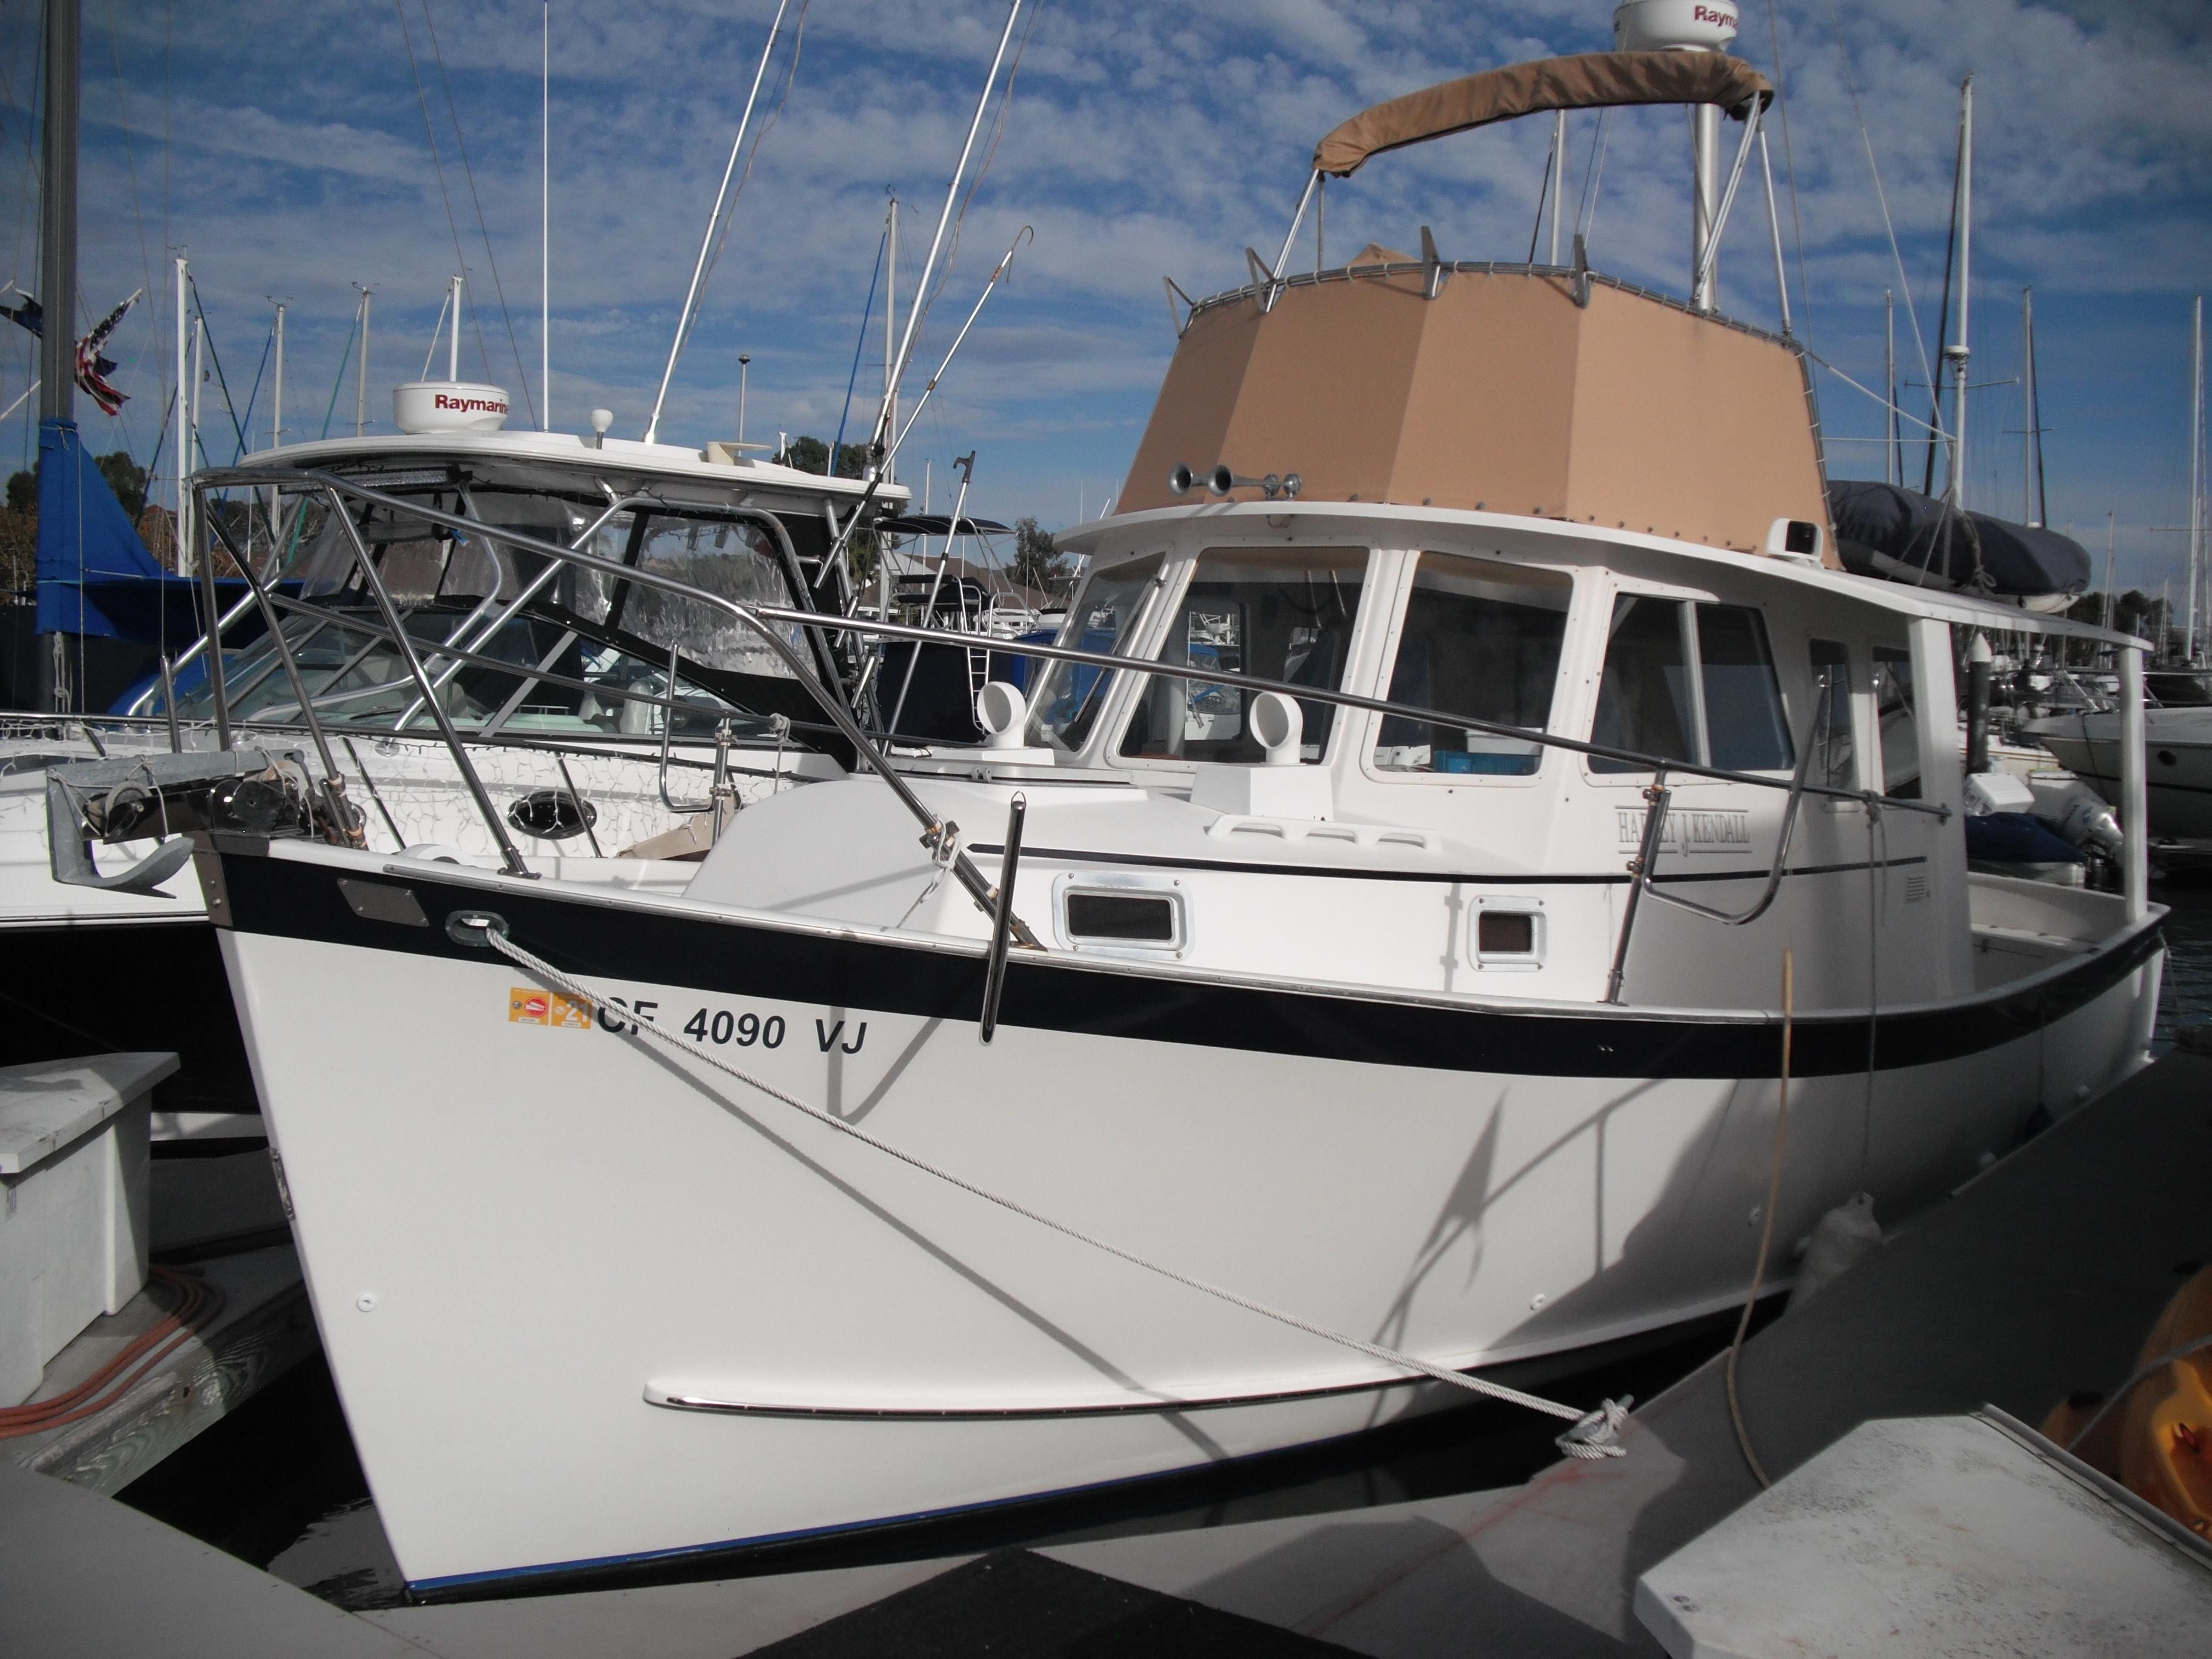 trawler yachts for sale in ontario